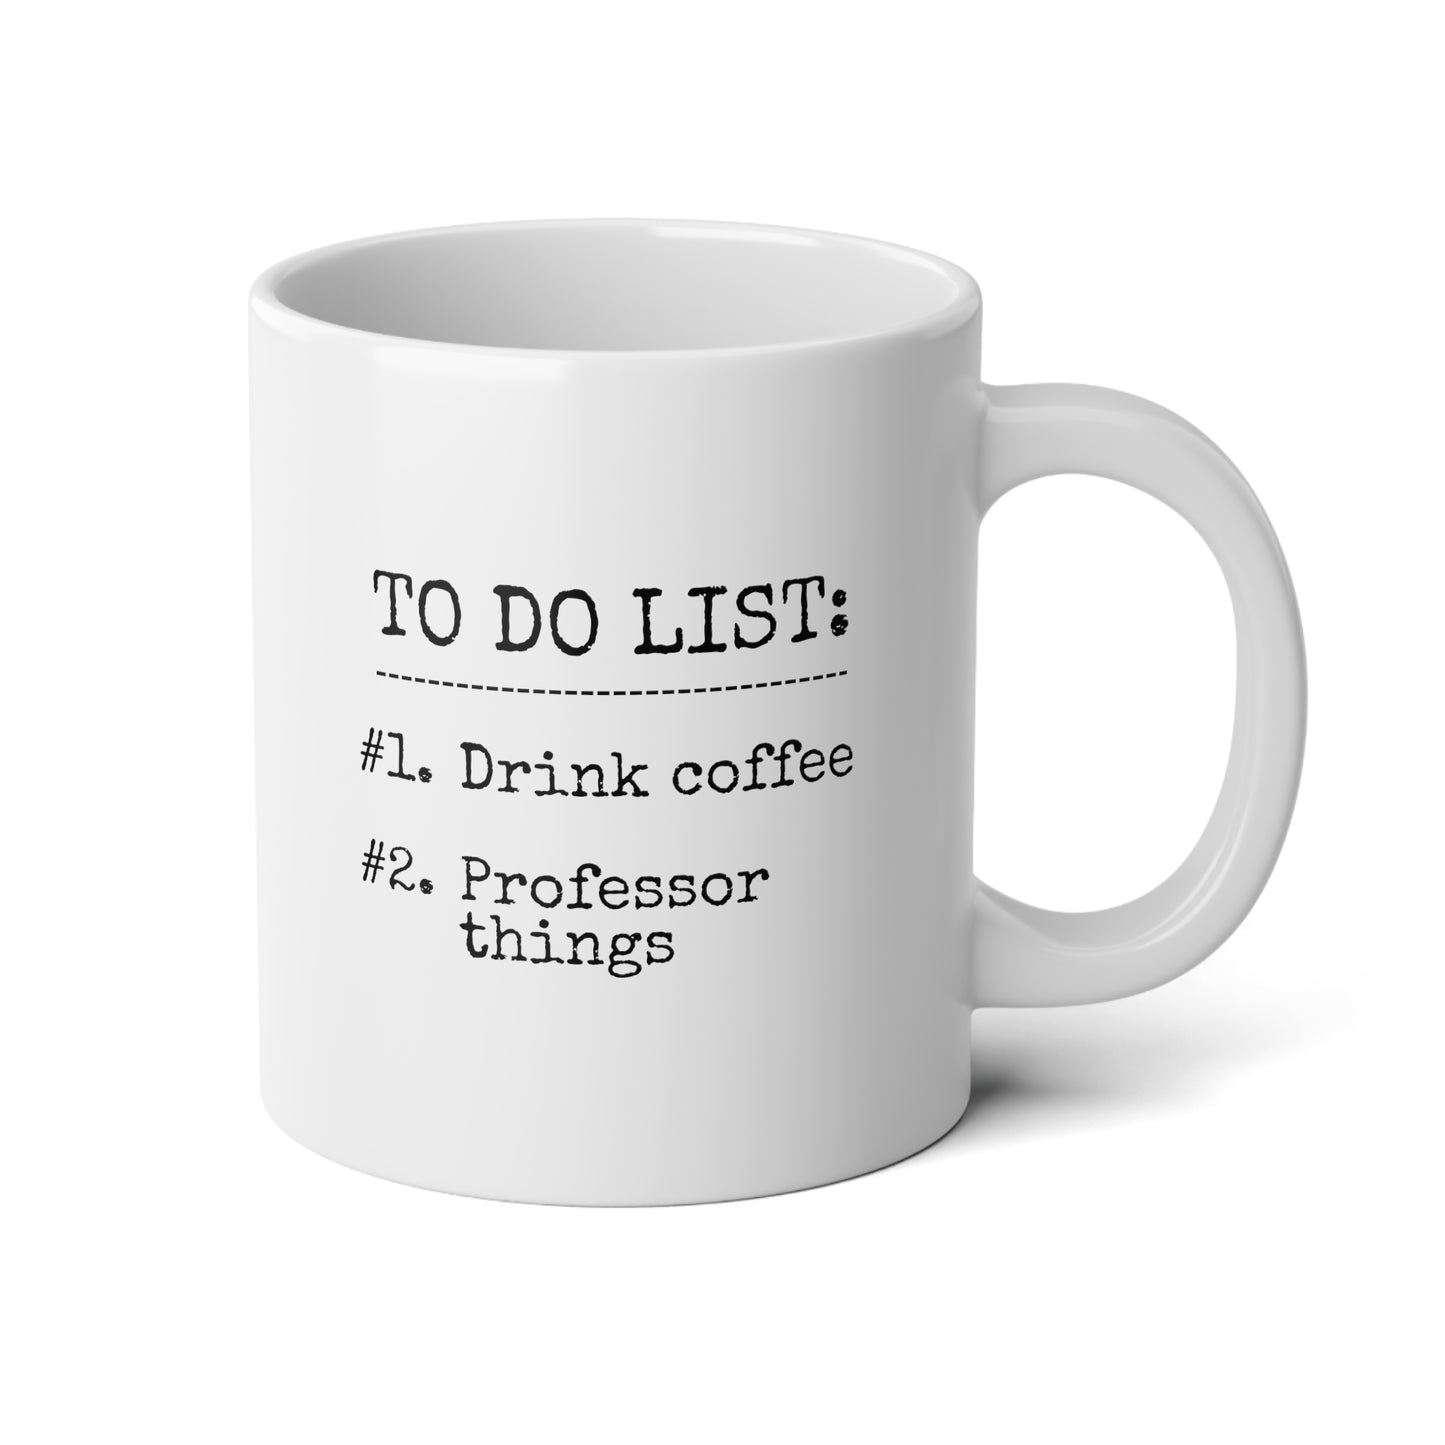 To Do List Drink Coffee Professor Things 20oz white funny large coffee mug gift for best college teacher instructor educator waveywares wavey wares wavywares wavy wares